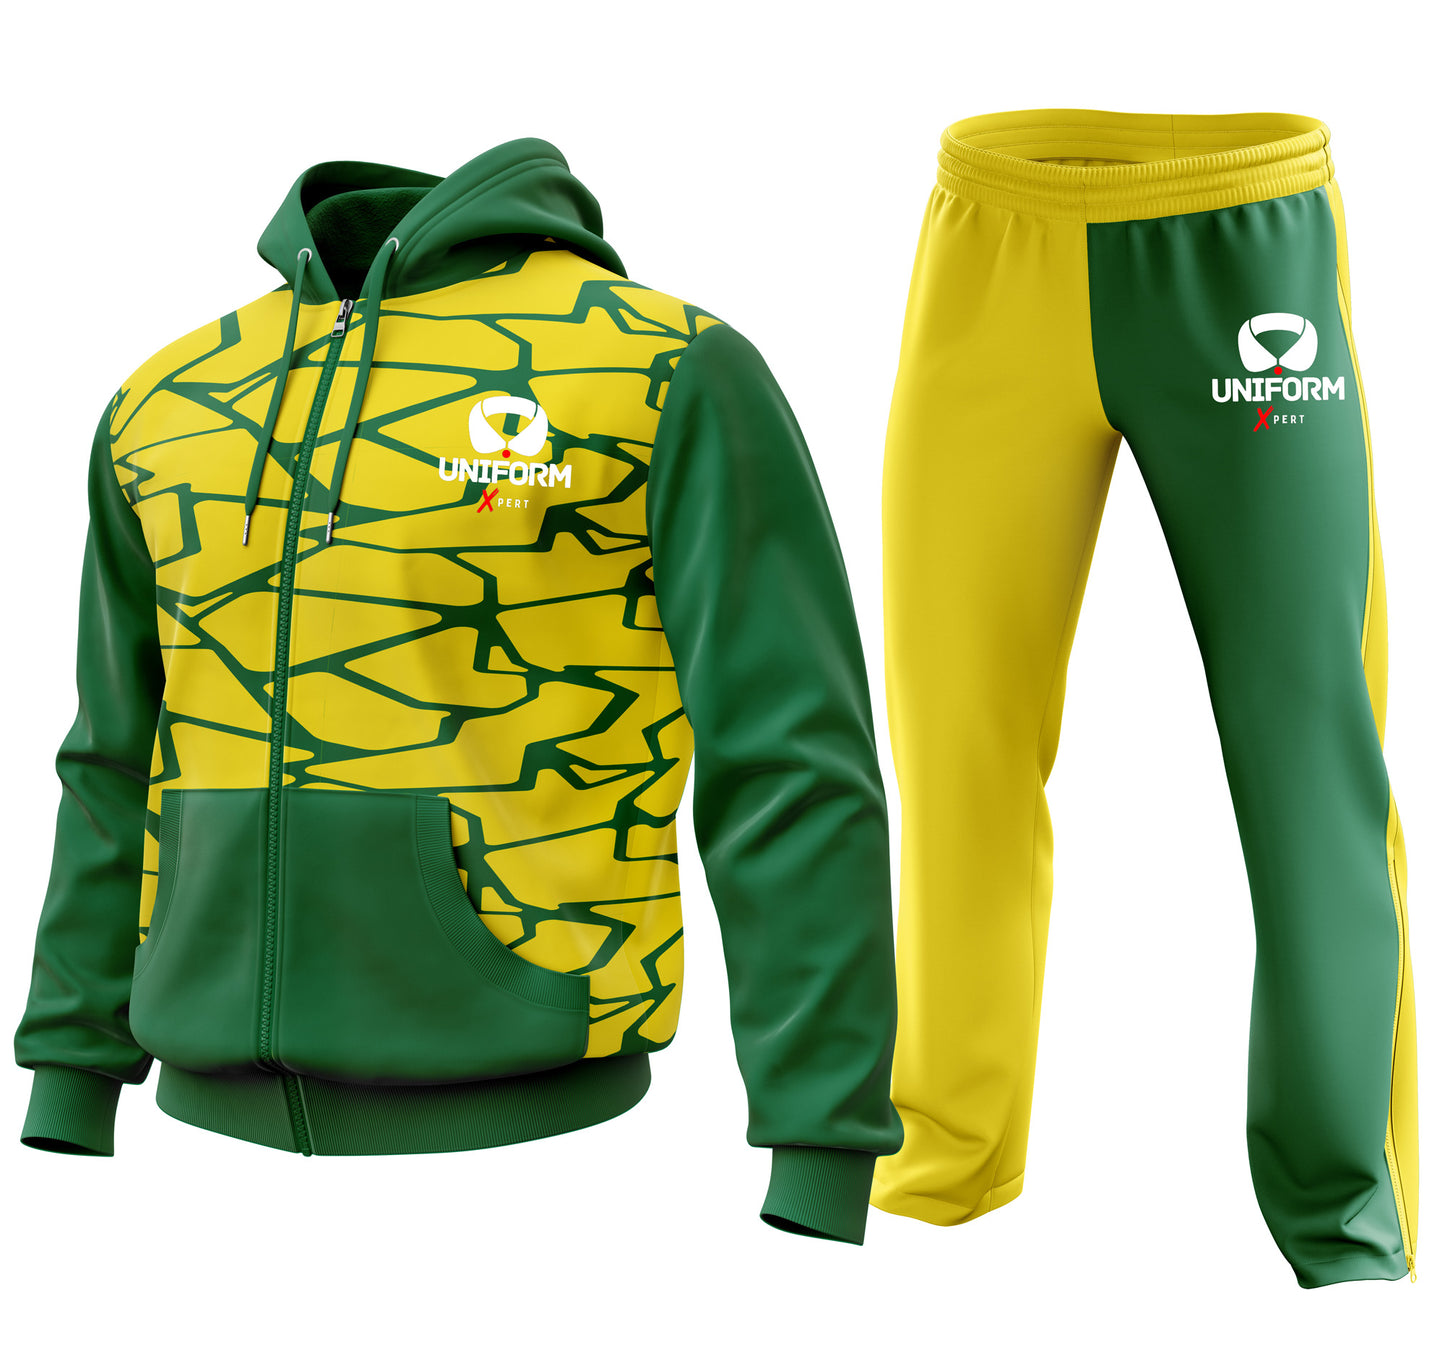 Versatile men's track suit featuring zippered pockets, elastic waistband, and adjustable cuffs for active lifestyles.